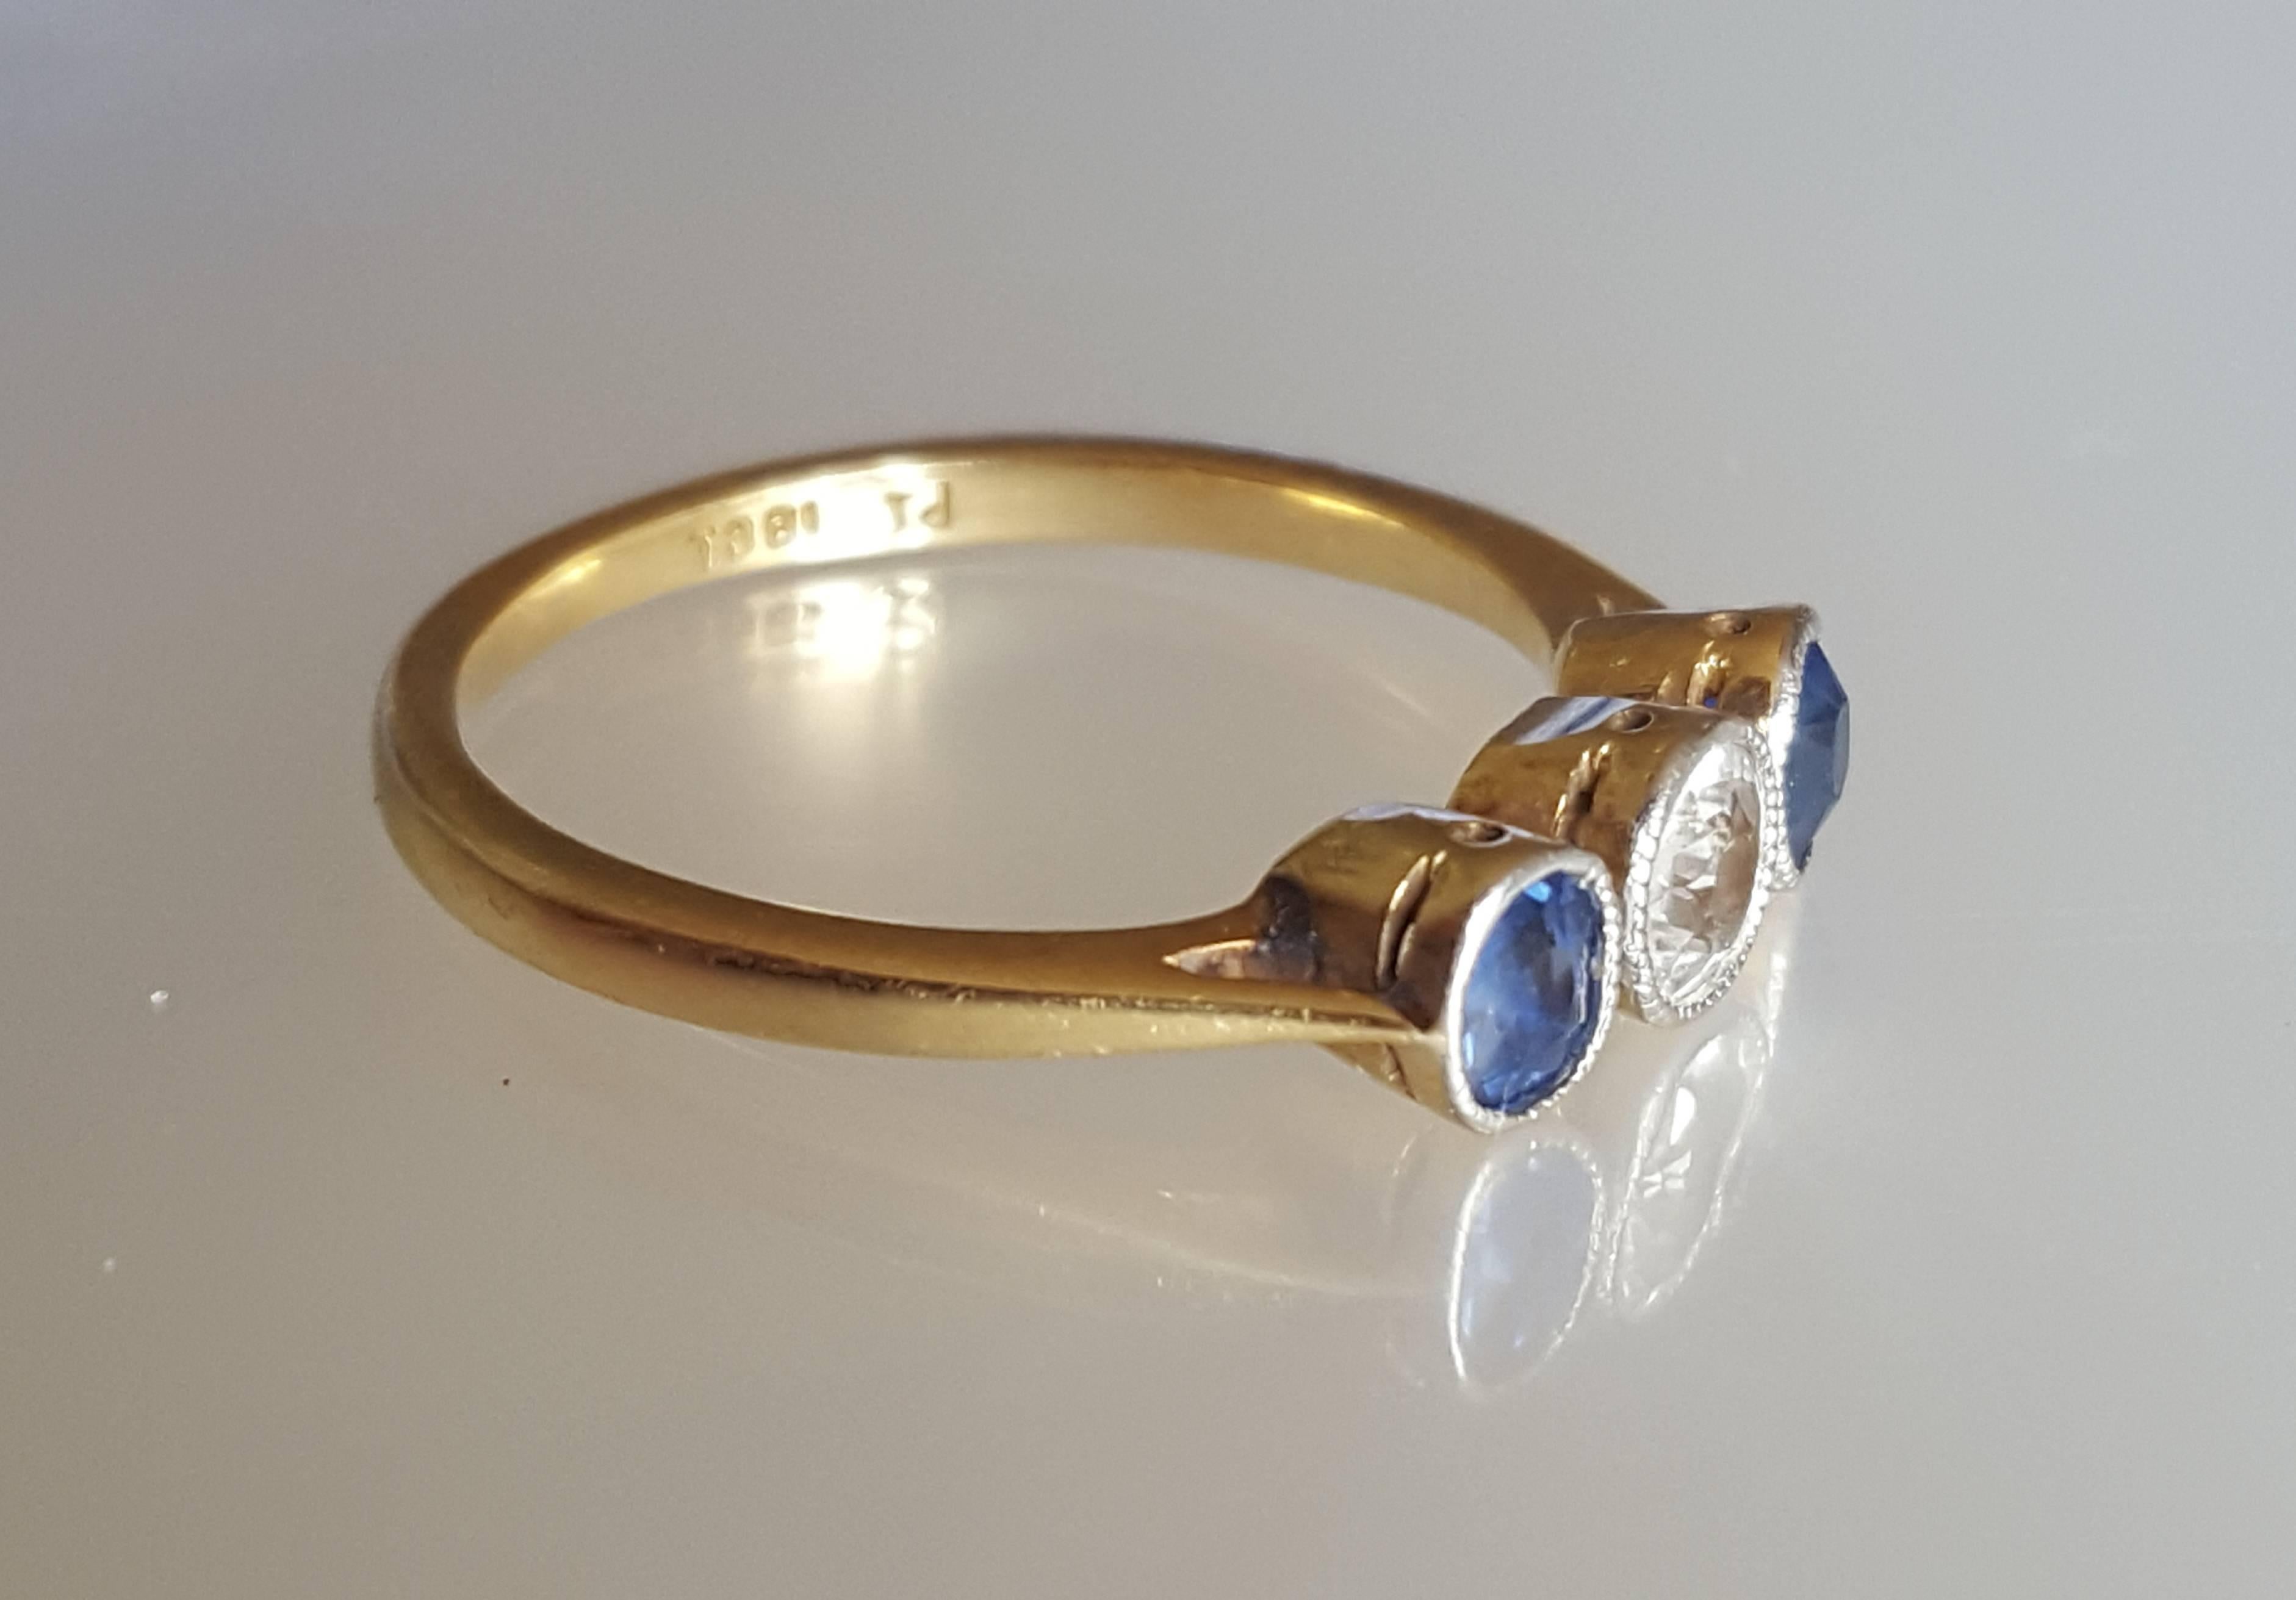 A Beautiful Art Deco c.1920s/30s 18 Carat Gold and white/ blue Sapphire trilogy engagement ring.  Sapphire in Platinum topped bezel setting. English origin. 
Size 7.5 US, O UK. 
Height of the face 5mm 
Marked 18CT for 18 Carat Gold. 